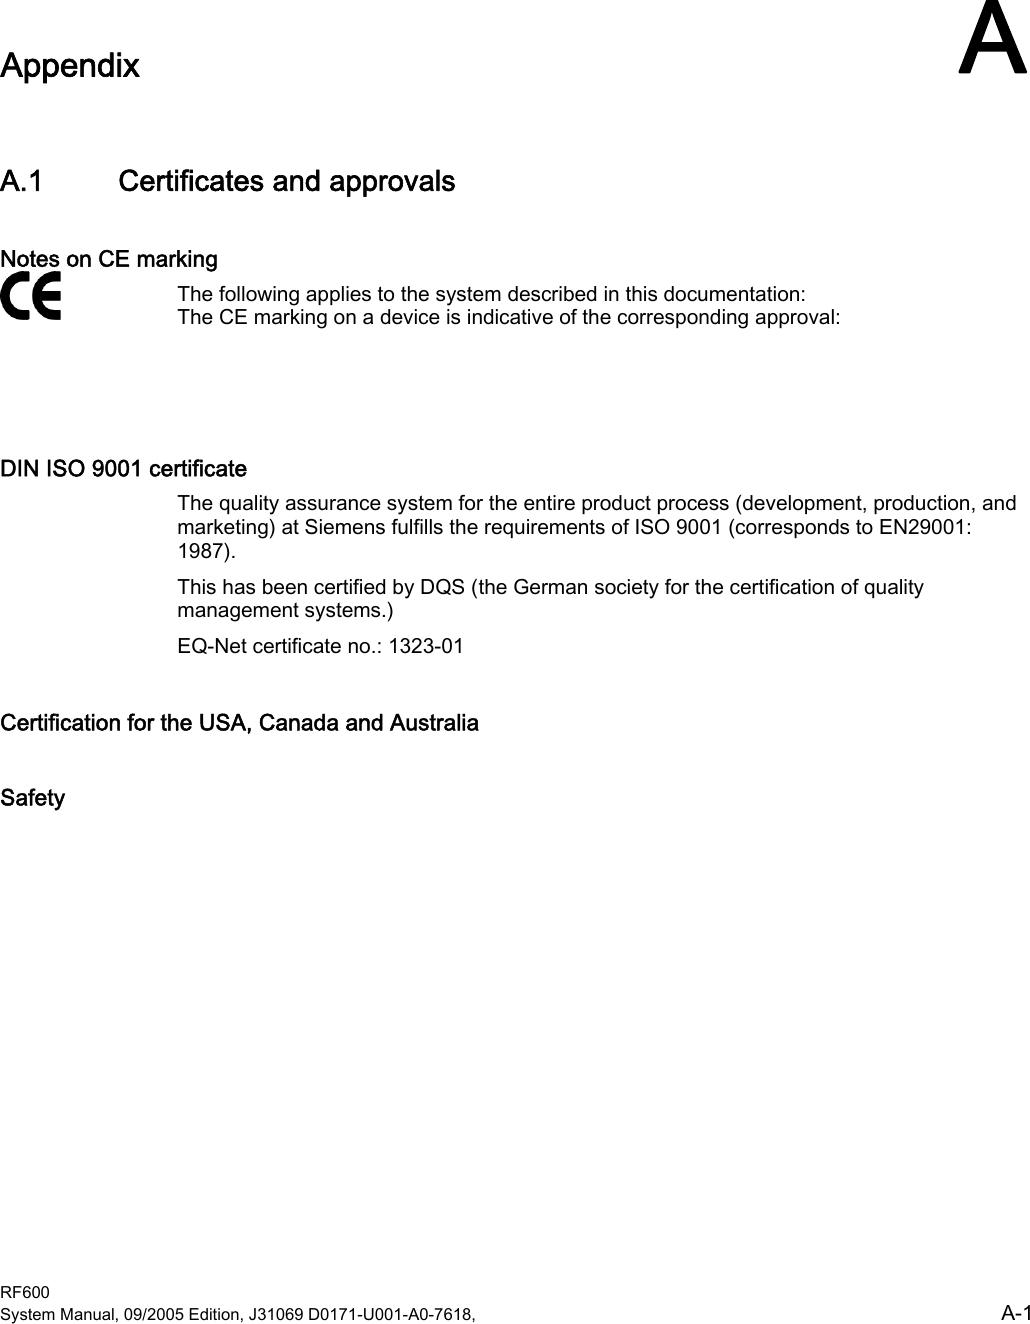  RF600 System Manual, 09/2005 Edition, J31069 D0171-U001-A0-7618,    A-1 Appendix  AA.1 Certificates and approvals Notes on CE marking The following applies to the system described in this documentation:  The CE marking on a device is indicative of the corresponding approval:  DIN ISO 9001 certificate The quality assurance system for the entire product process (development, production, and marketing) at Siemens fulfills the requirements of ISO 9001 (corresponds to EN29001: 1987). This has been certified by DQS (the German society for the certification of quality management systems.) EQ-Net certificate no.: 1323-01 Certification for the USA, Canada and Australia Safety   